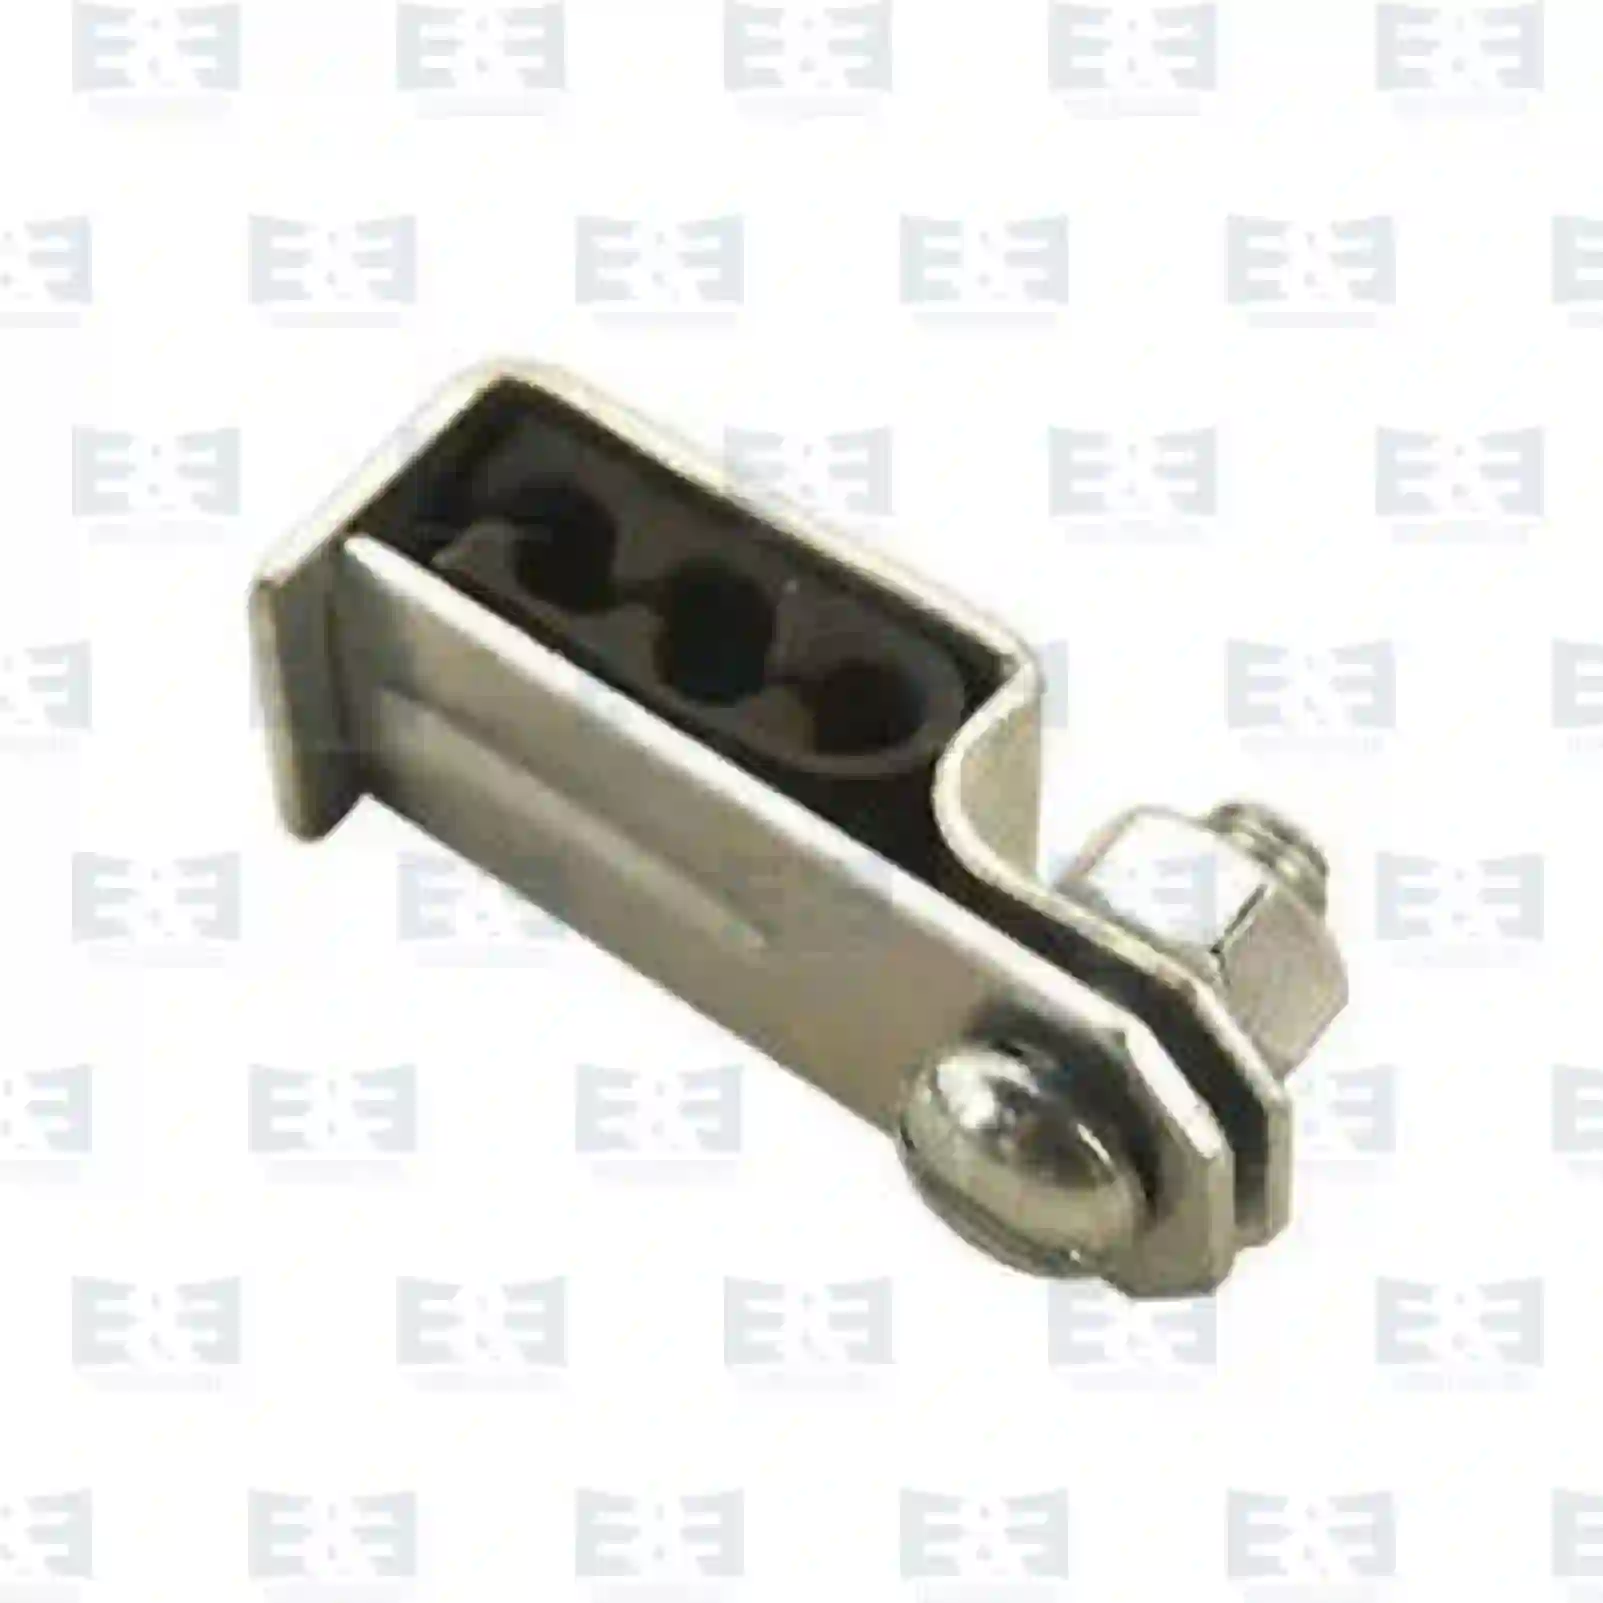 Injection Line Kit Clamp, injection lines, EE No 2E2287854 ,  oem no:51974016032, 51974016038, 51974016058, 51974016065, 0009951107, 3520780186, 4220780186, 5000821309, 5001857426, 1490268, 324689, 324690, 470182, 8194327, 8194352, ZG10372-0008 E&E Truck Spare Parts | Truck Spare Parts, Auotomotive Spare Parts